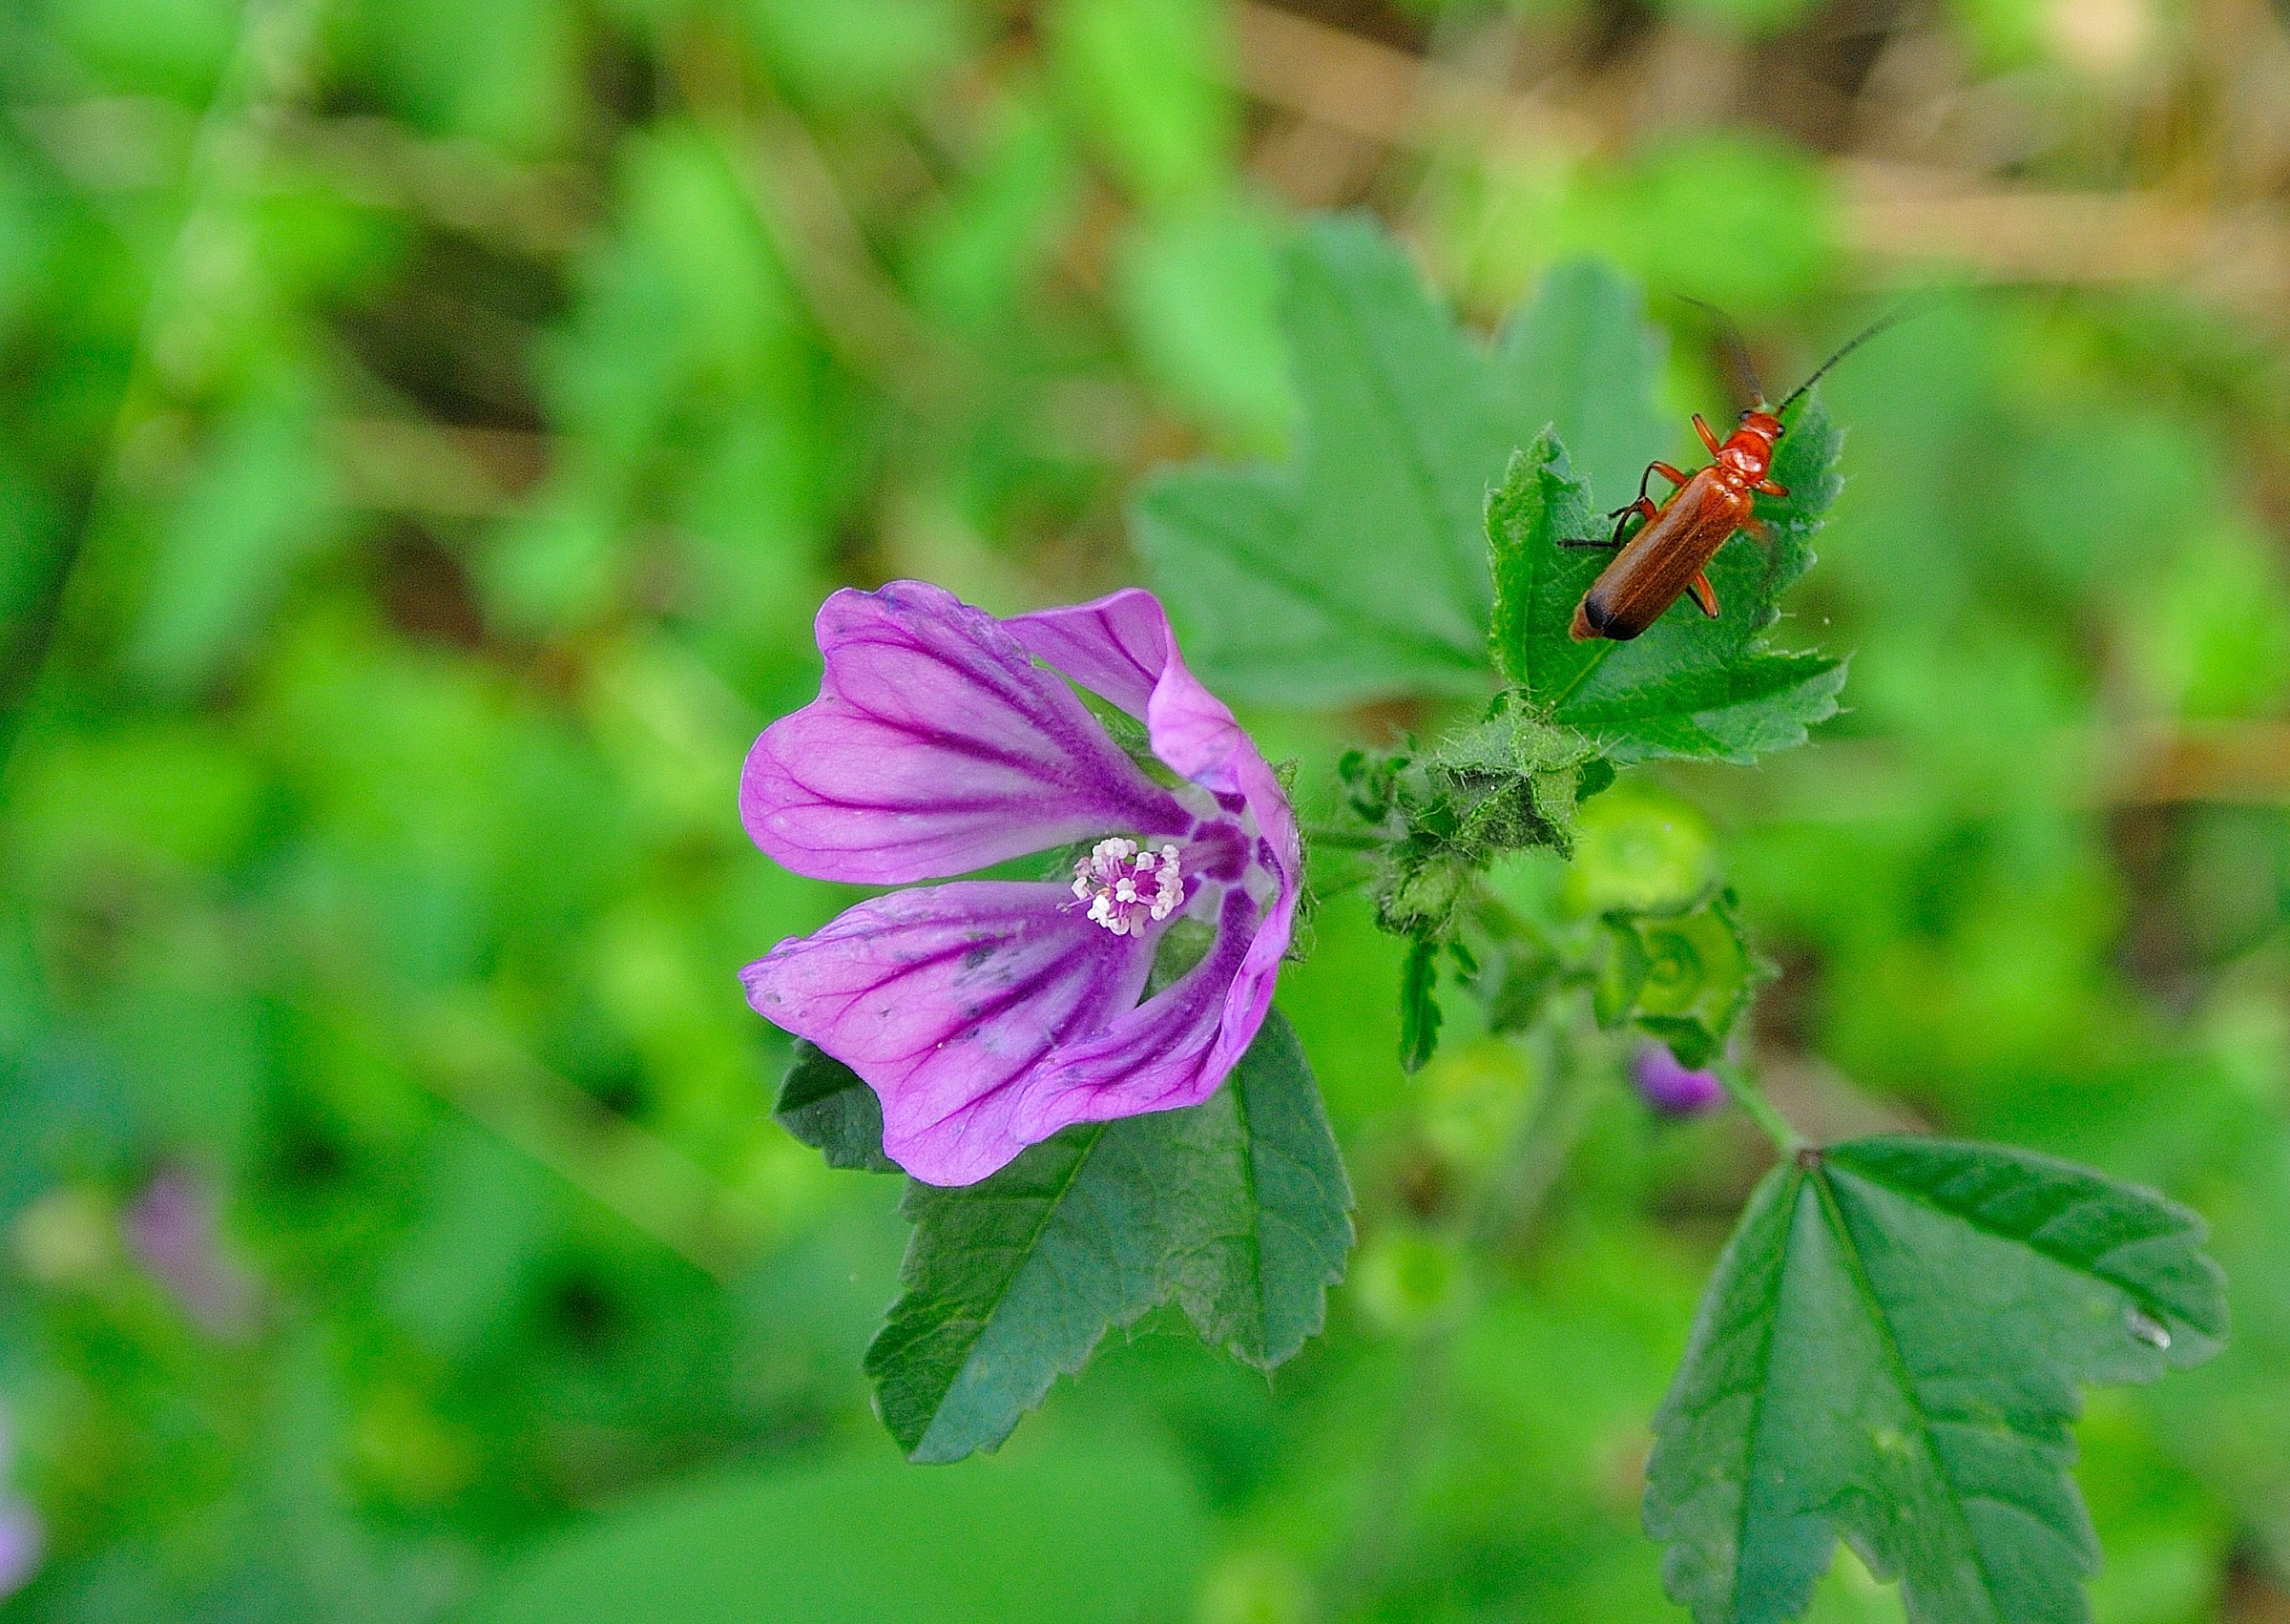 Flower and insect ......